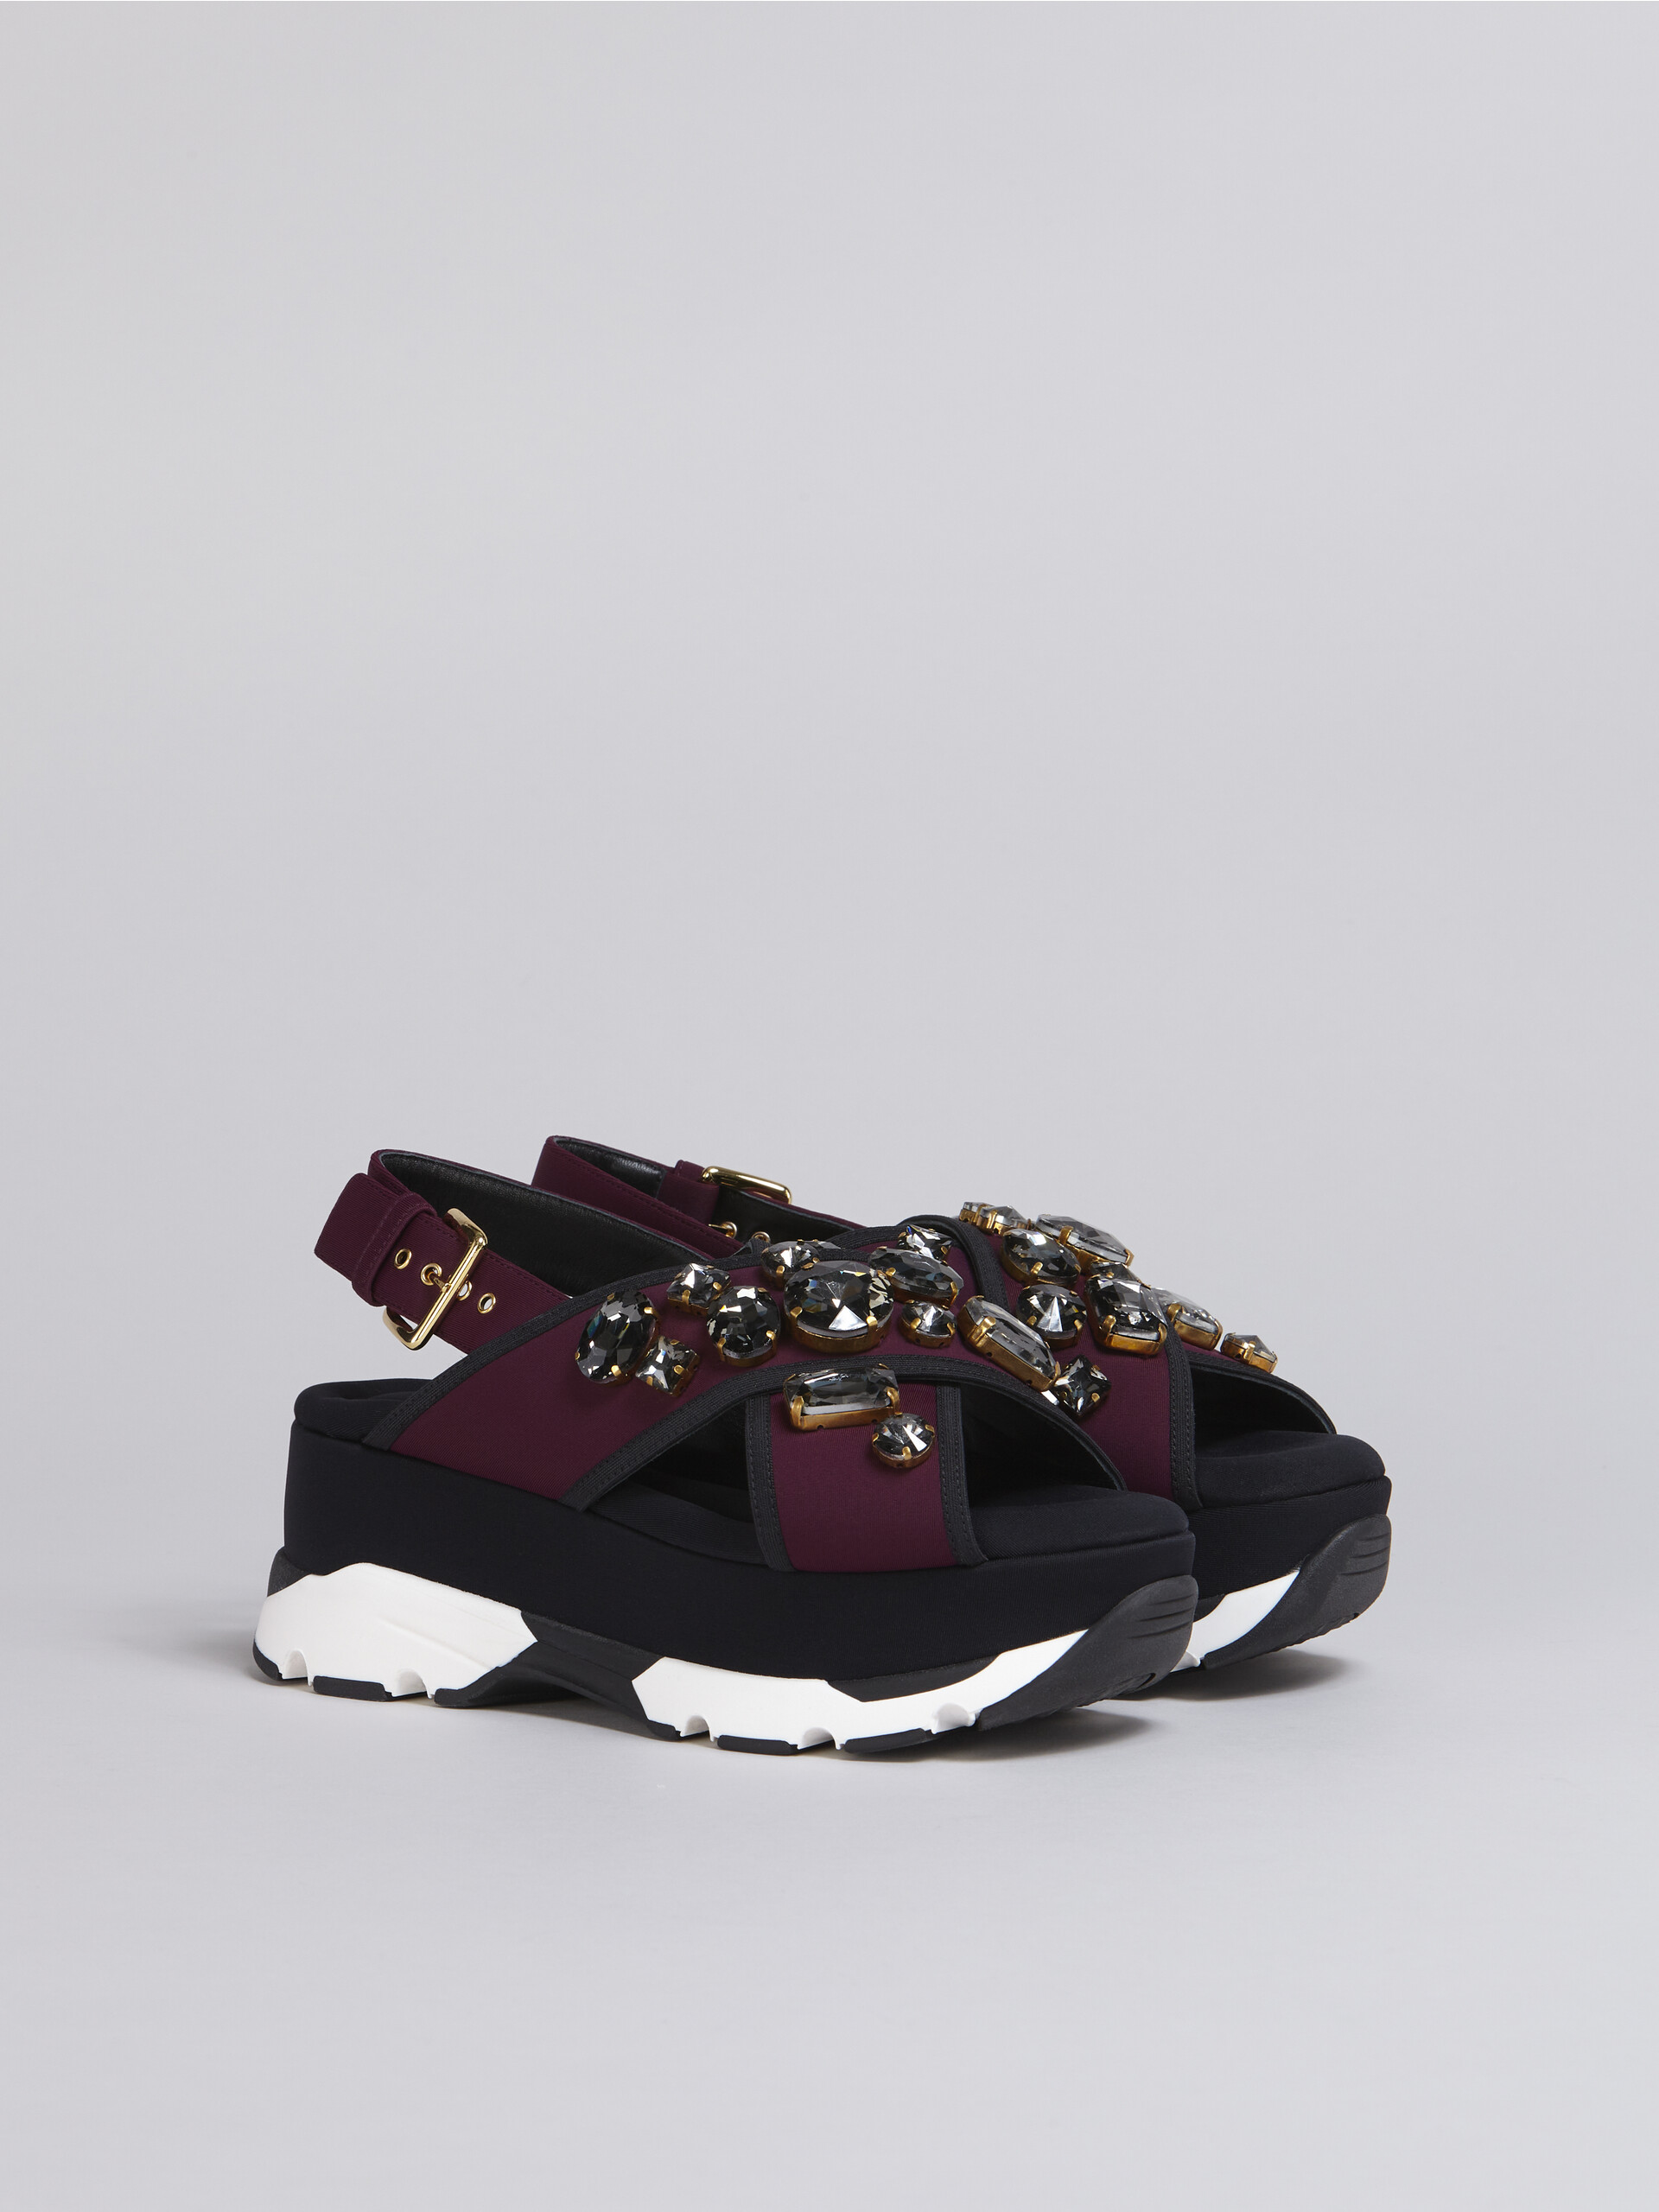 Burgundy and black wedge in technical fabric - Sandals - Image 2